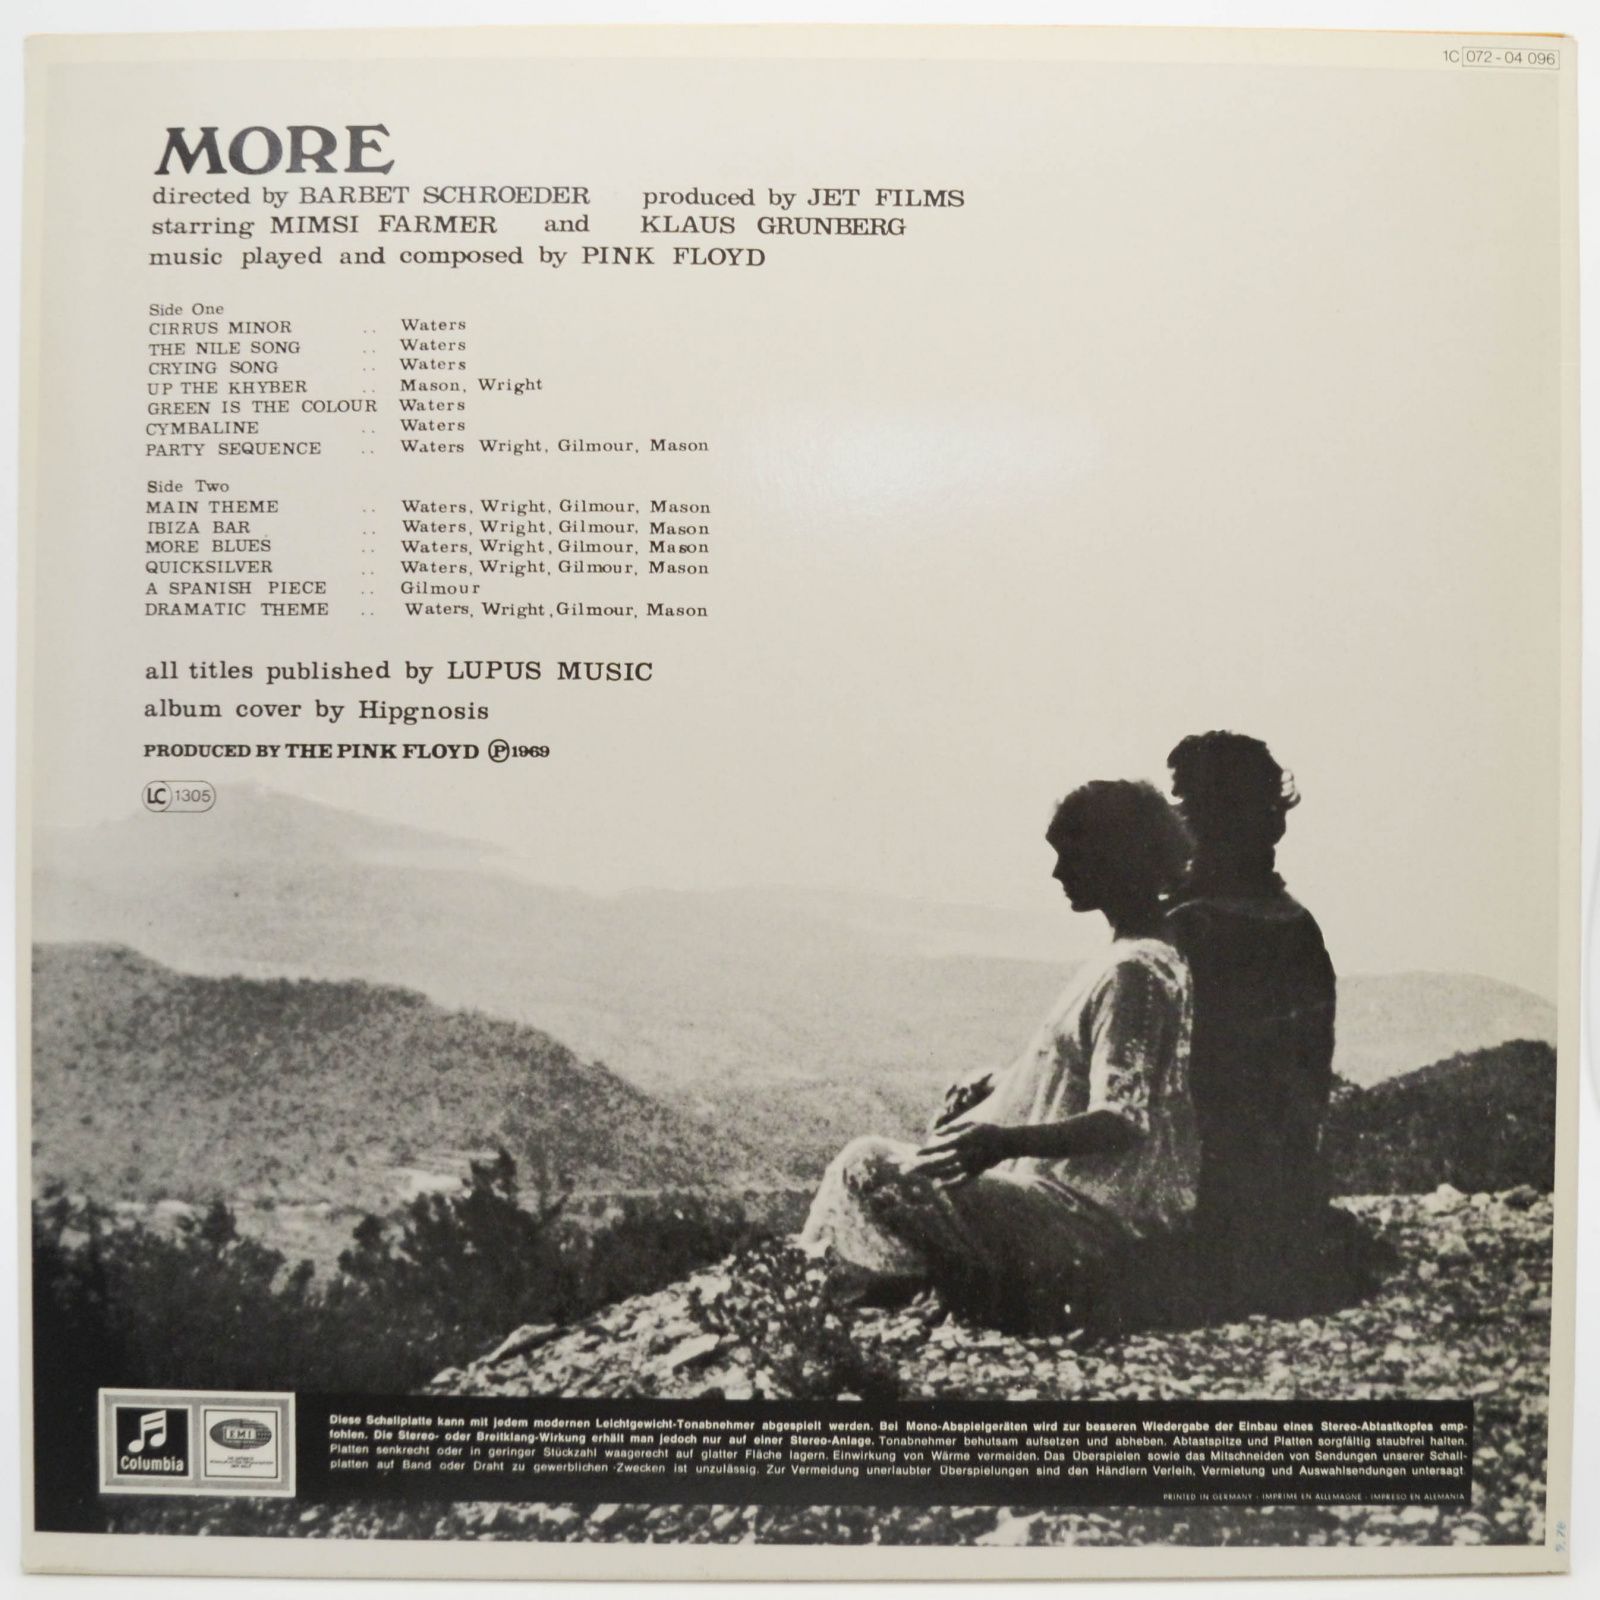 Pink Floyd — Soundtrack From The Film "More", 1969